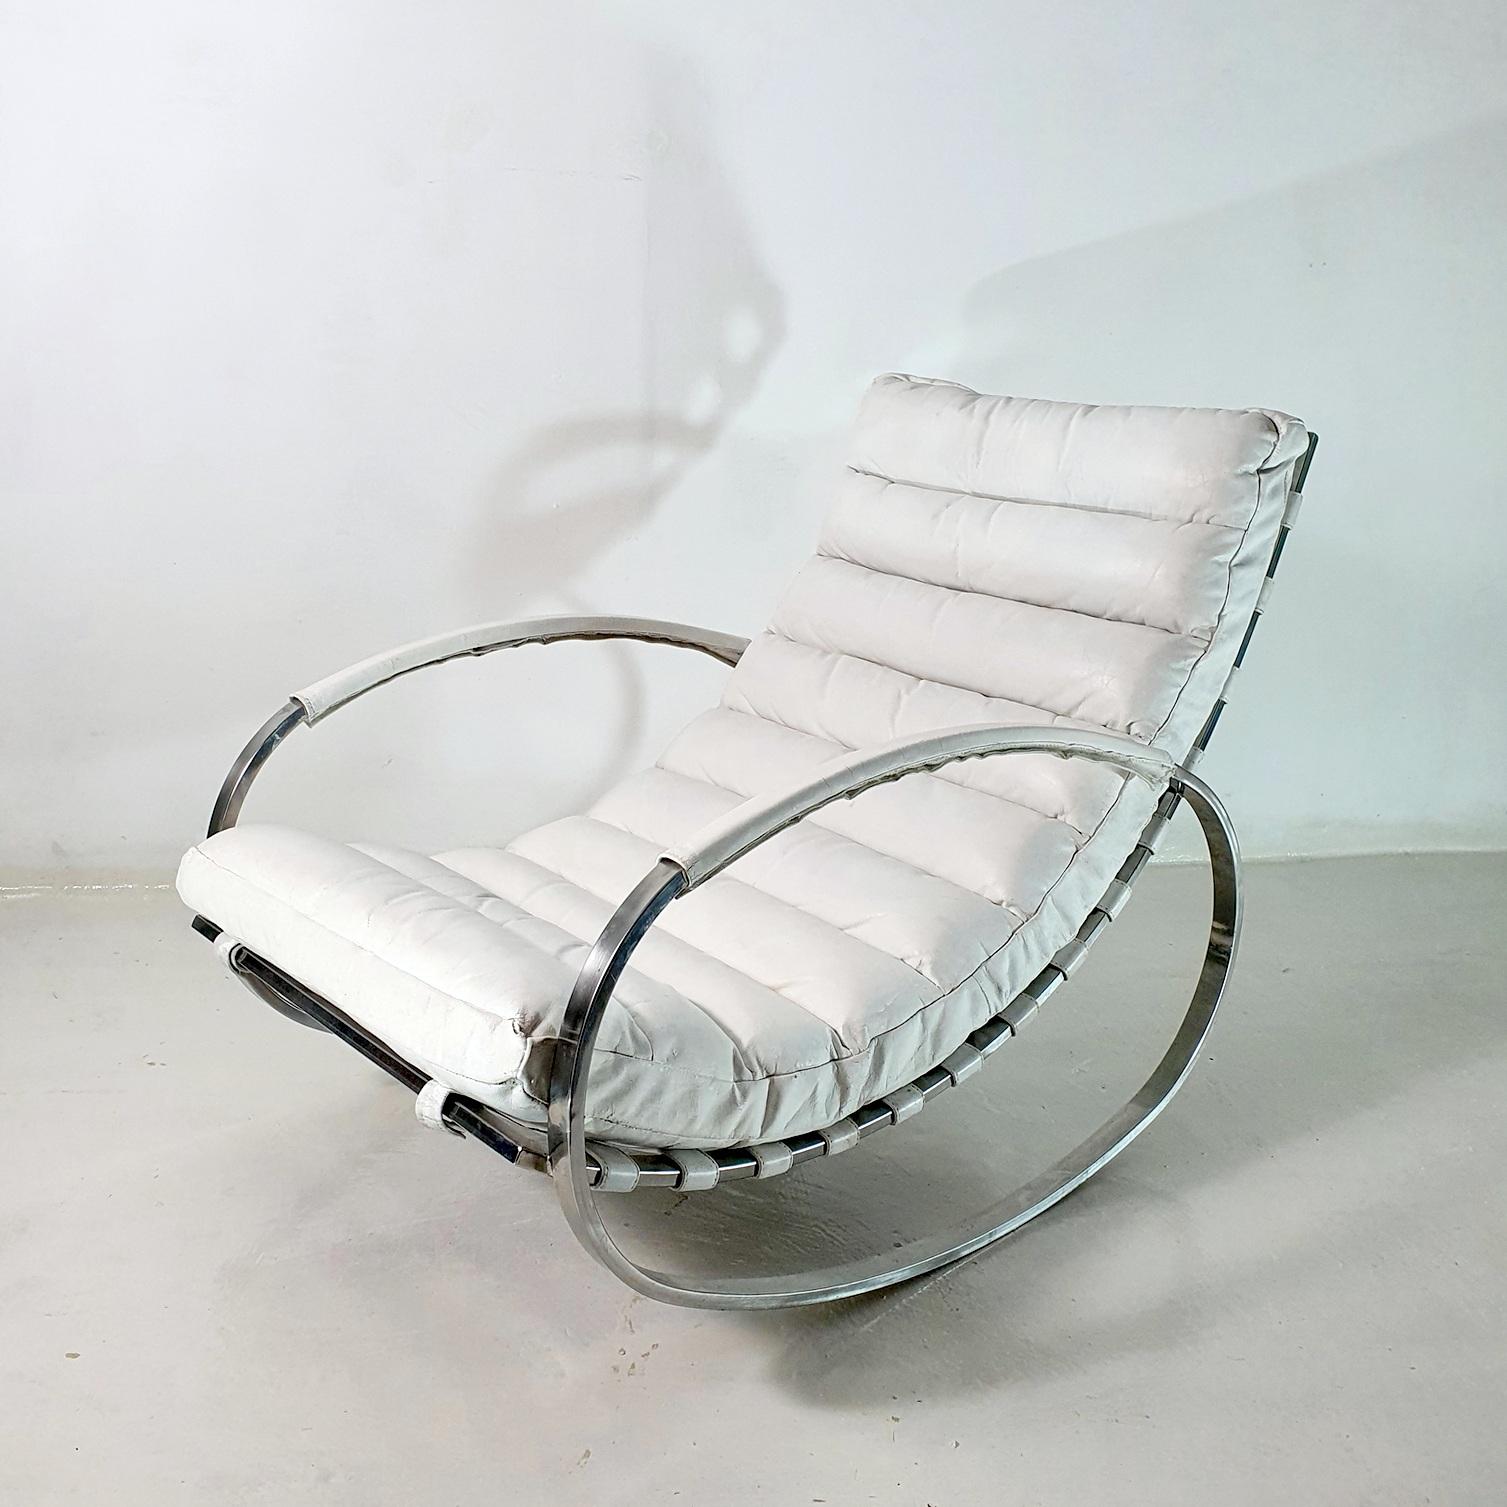 The Ellipse rocking chair designed by Renato Zevi for Selig, Italy 1970's. Chrome-plated steel frame with original white leather upholstery. The chrome frame has a nice mirrored finish. The leather is original and has not been changed. If that is